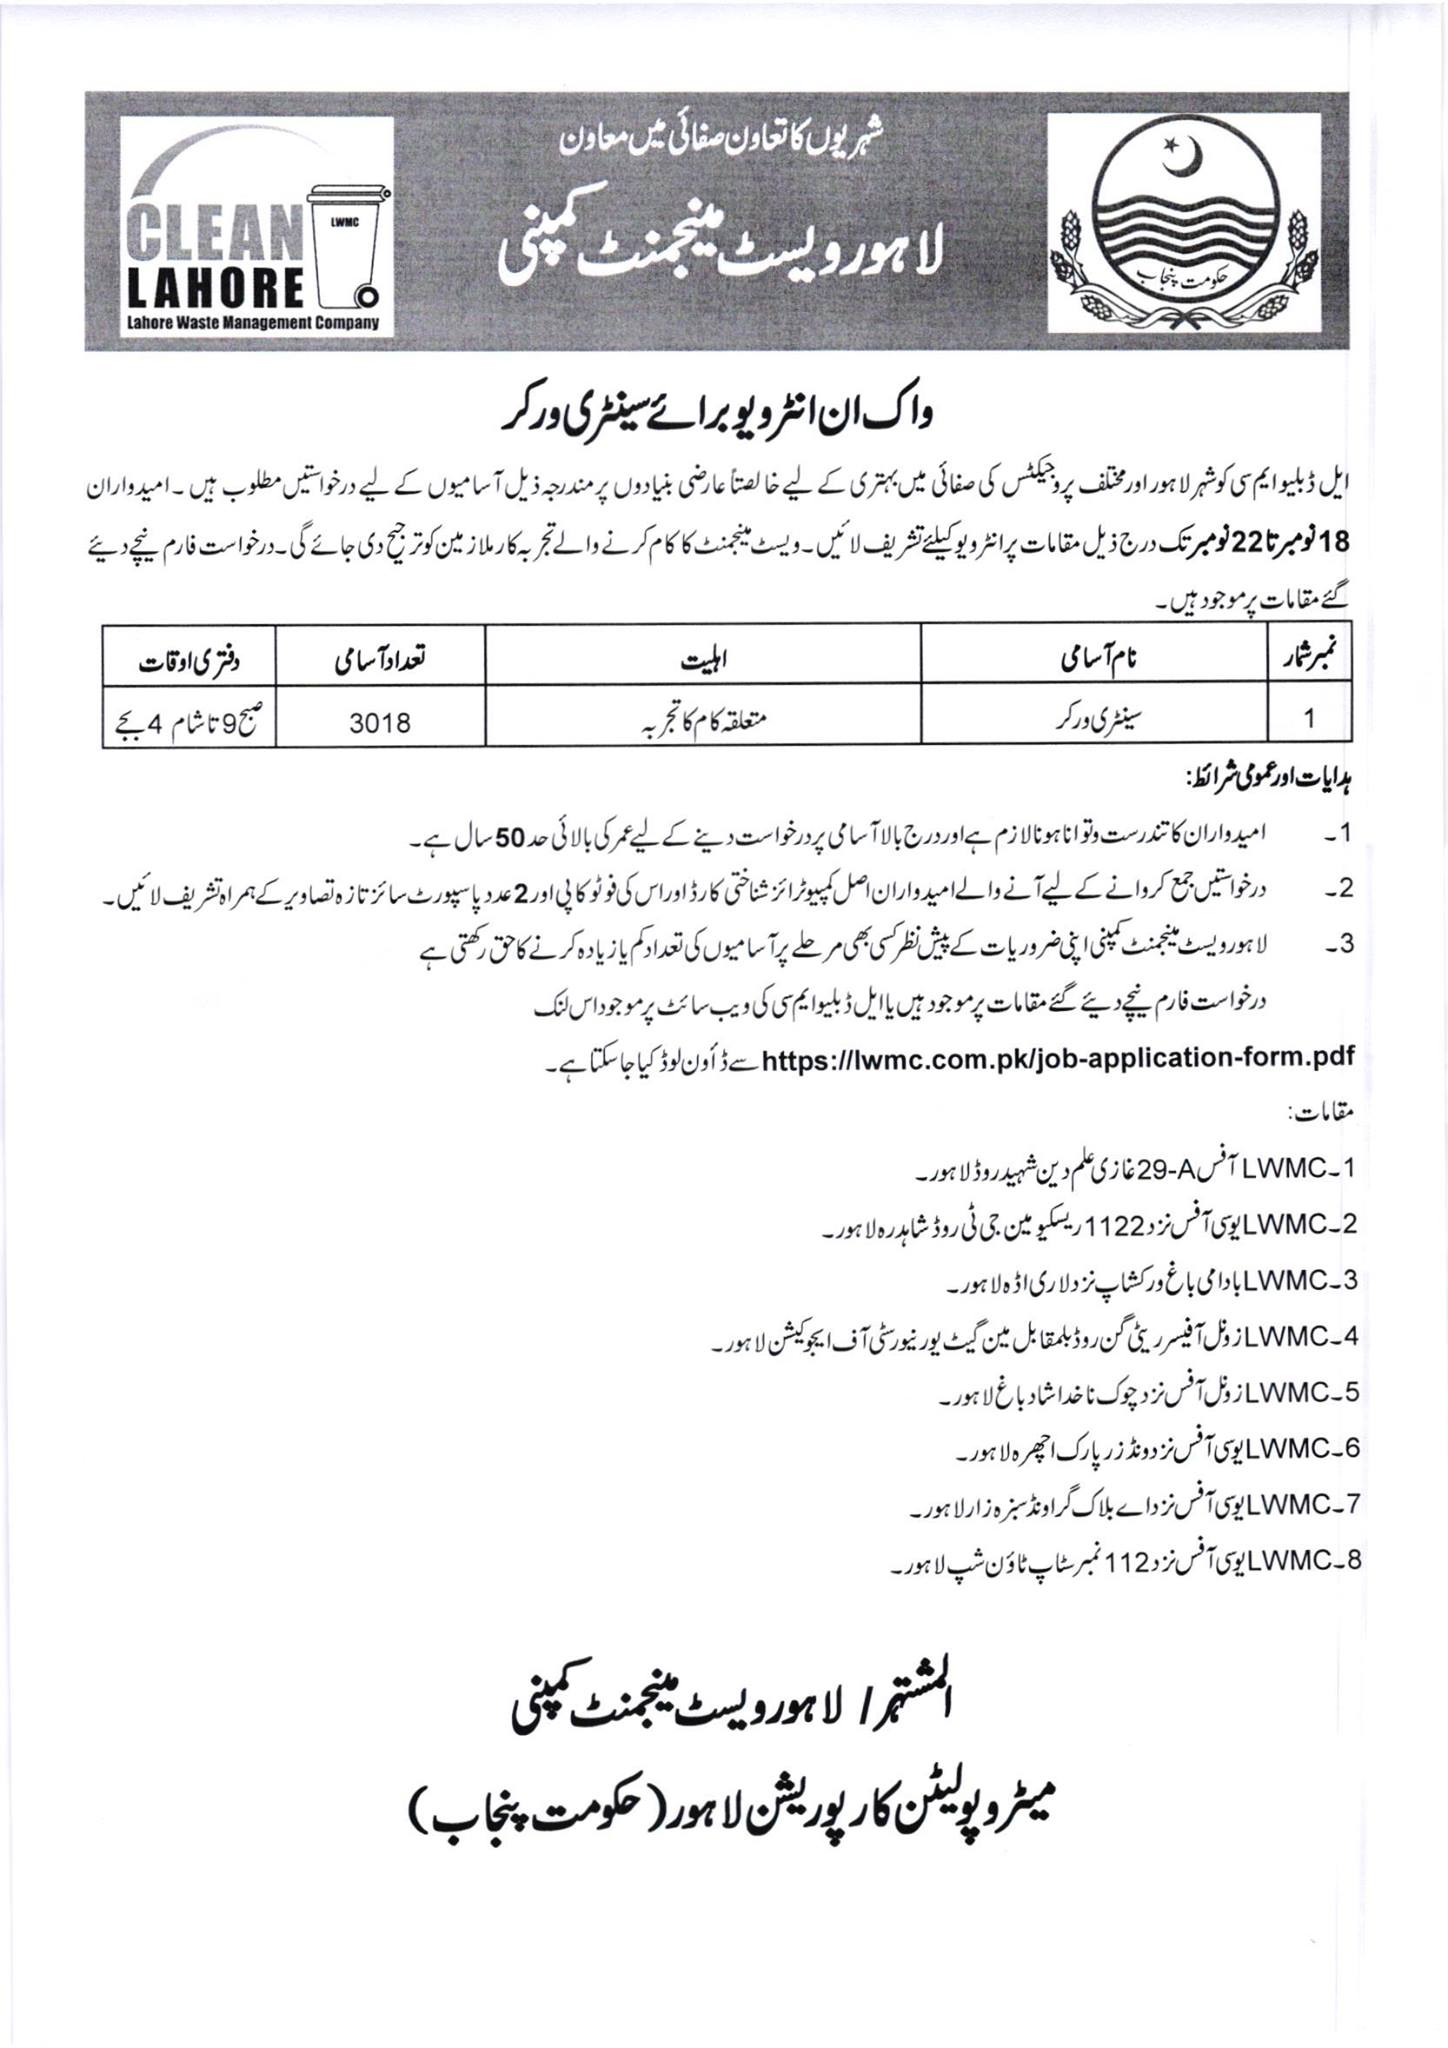 Sanitary Worker Jobs in Lahore Waste Management Company November 2020 Application Form Walk in Interview LWMC 